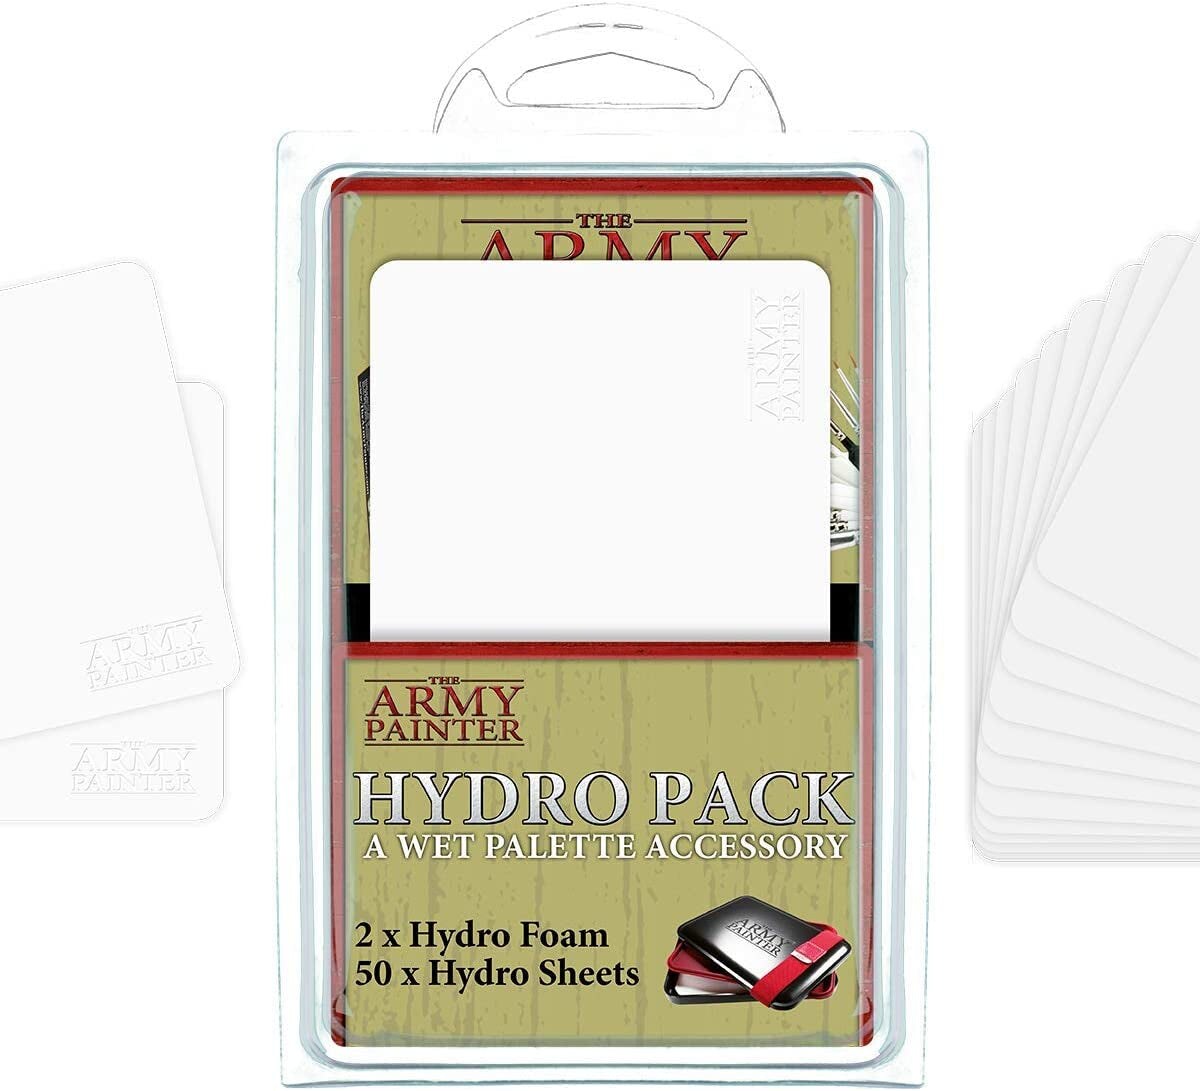 Hydropack Bundle Stay Wet Palette for Acrylic Painting - Acrylic